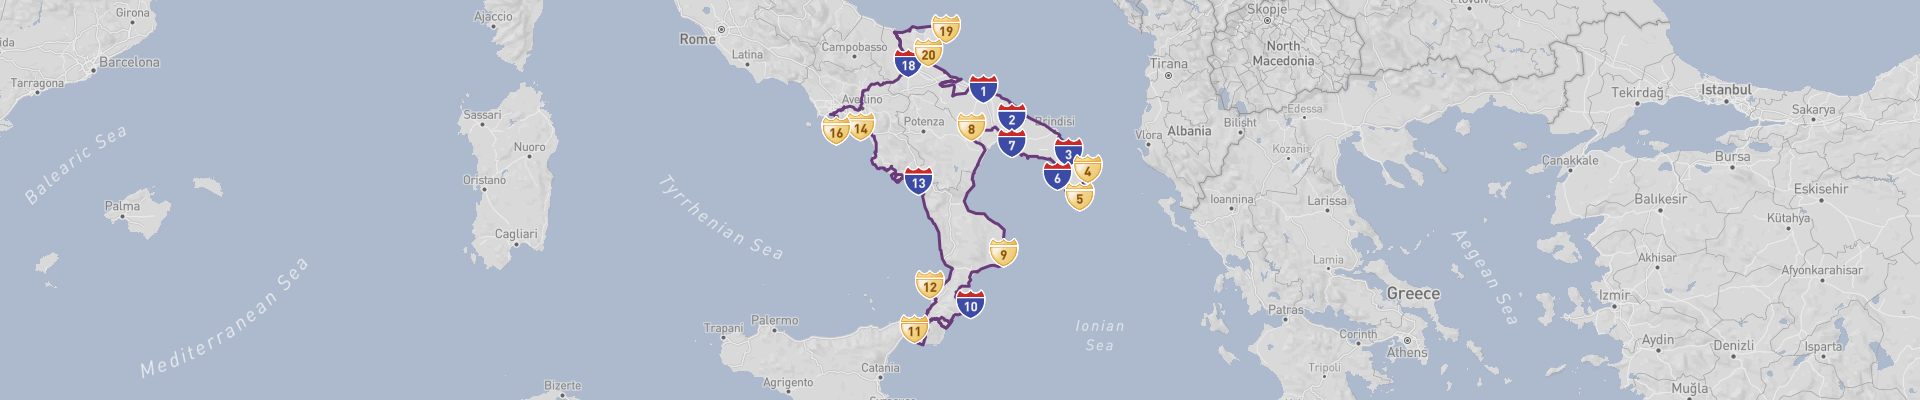 South Italy Road Trip